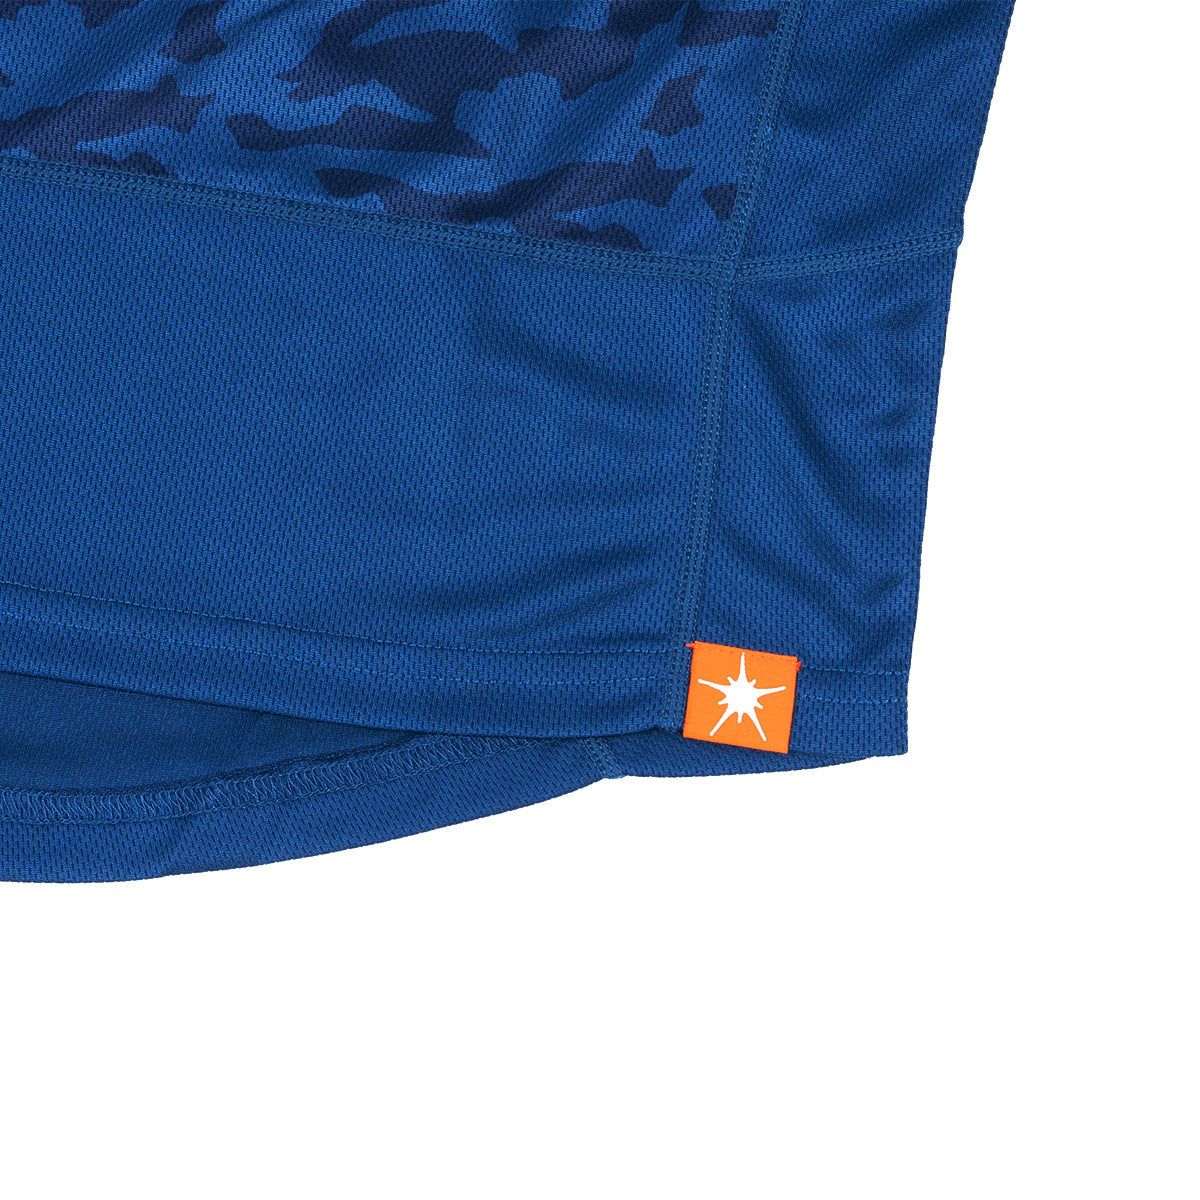 On-One MX Long Sleeve Trail Jersey Men’s Navy